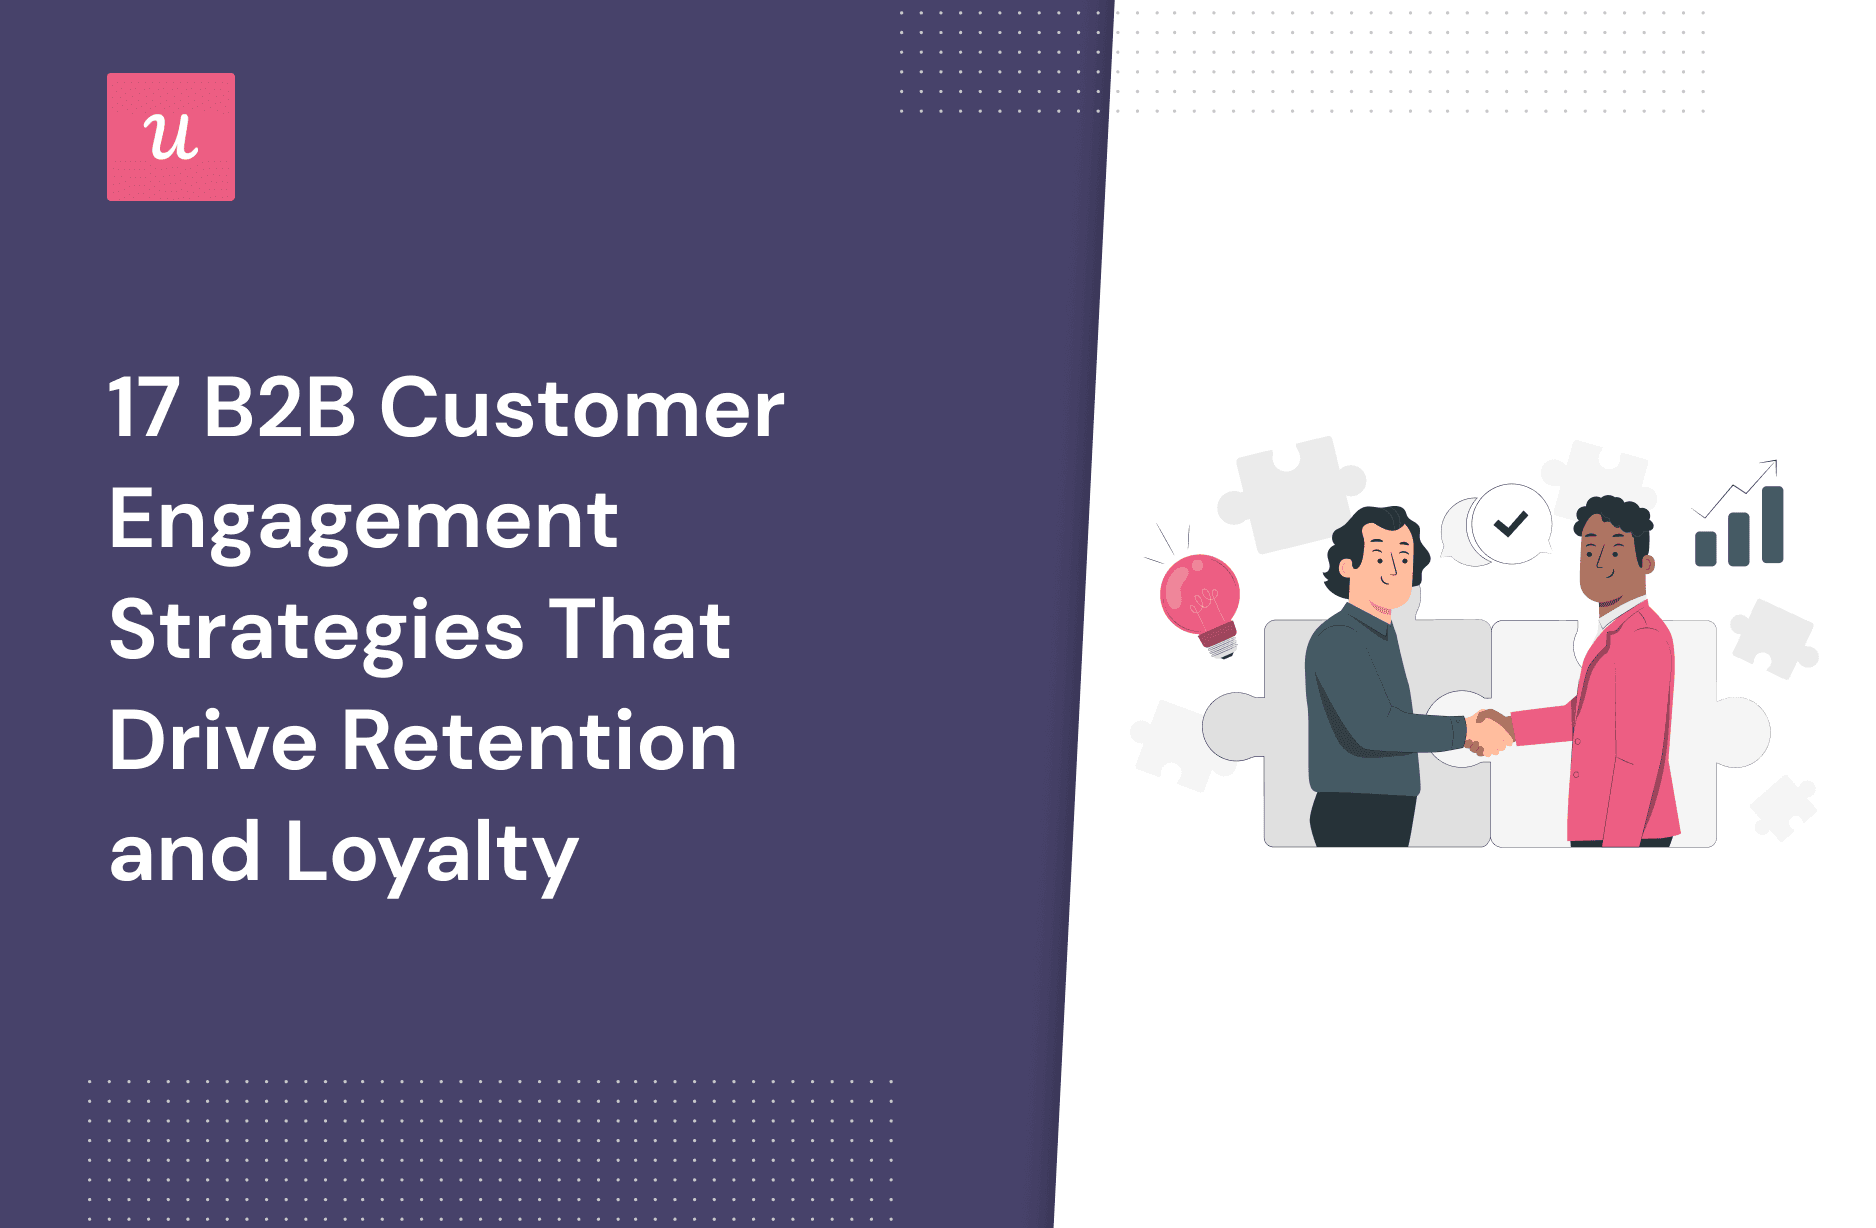 17 B2B Customer Engagement Strategies That Drive Retention and Loyalty cover